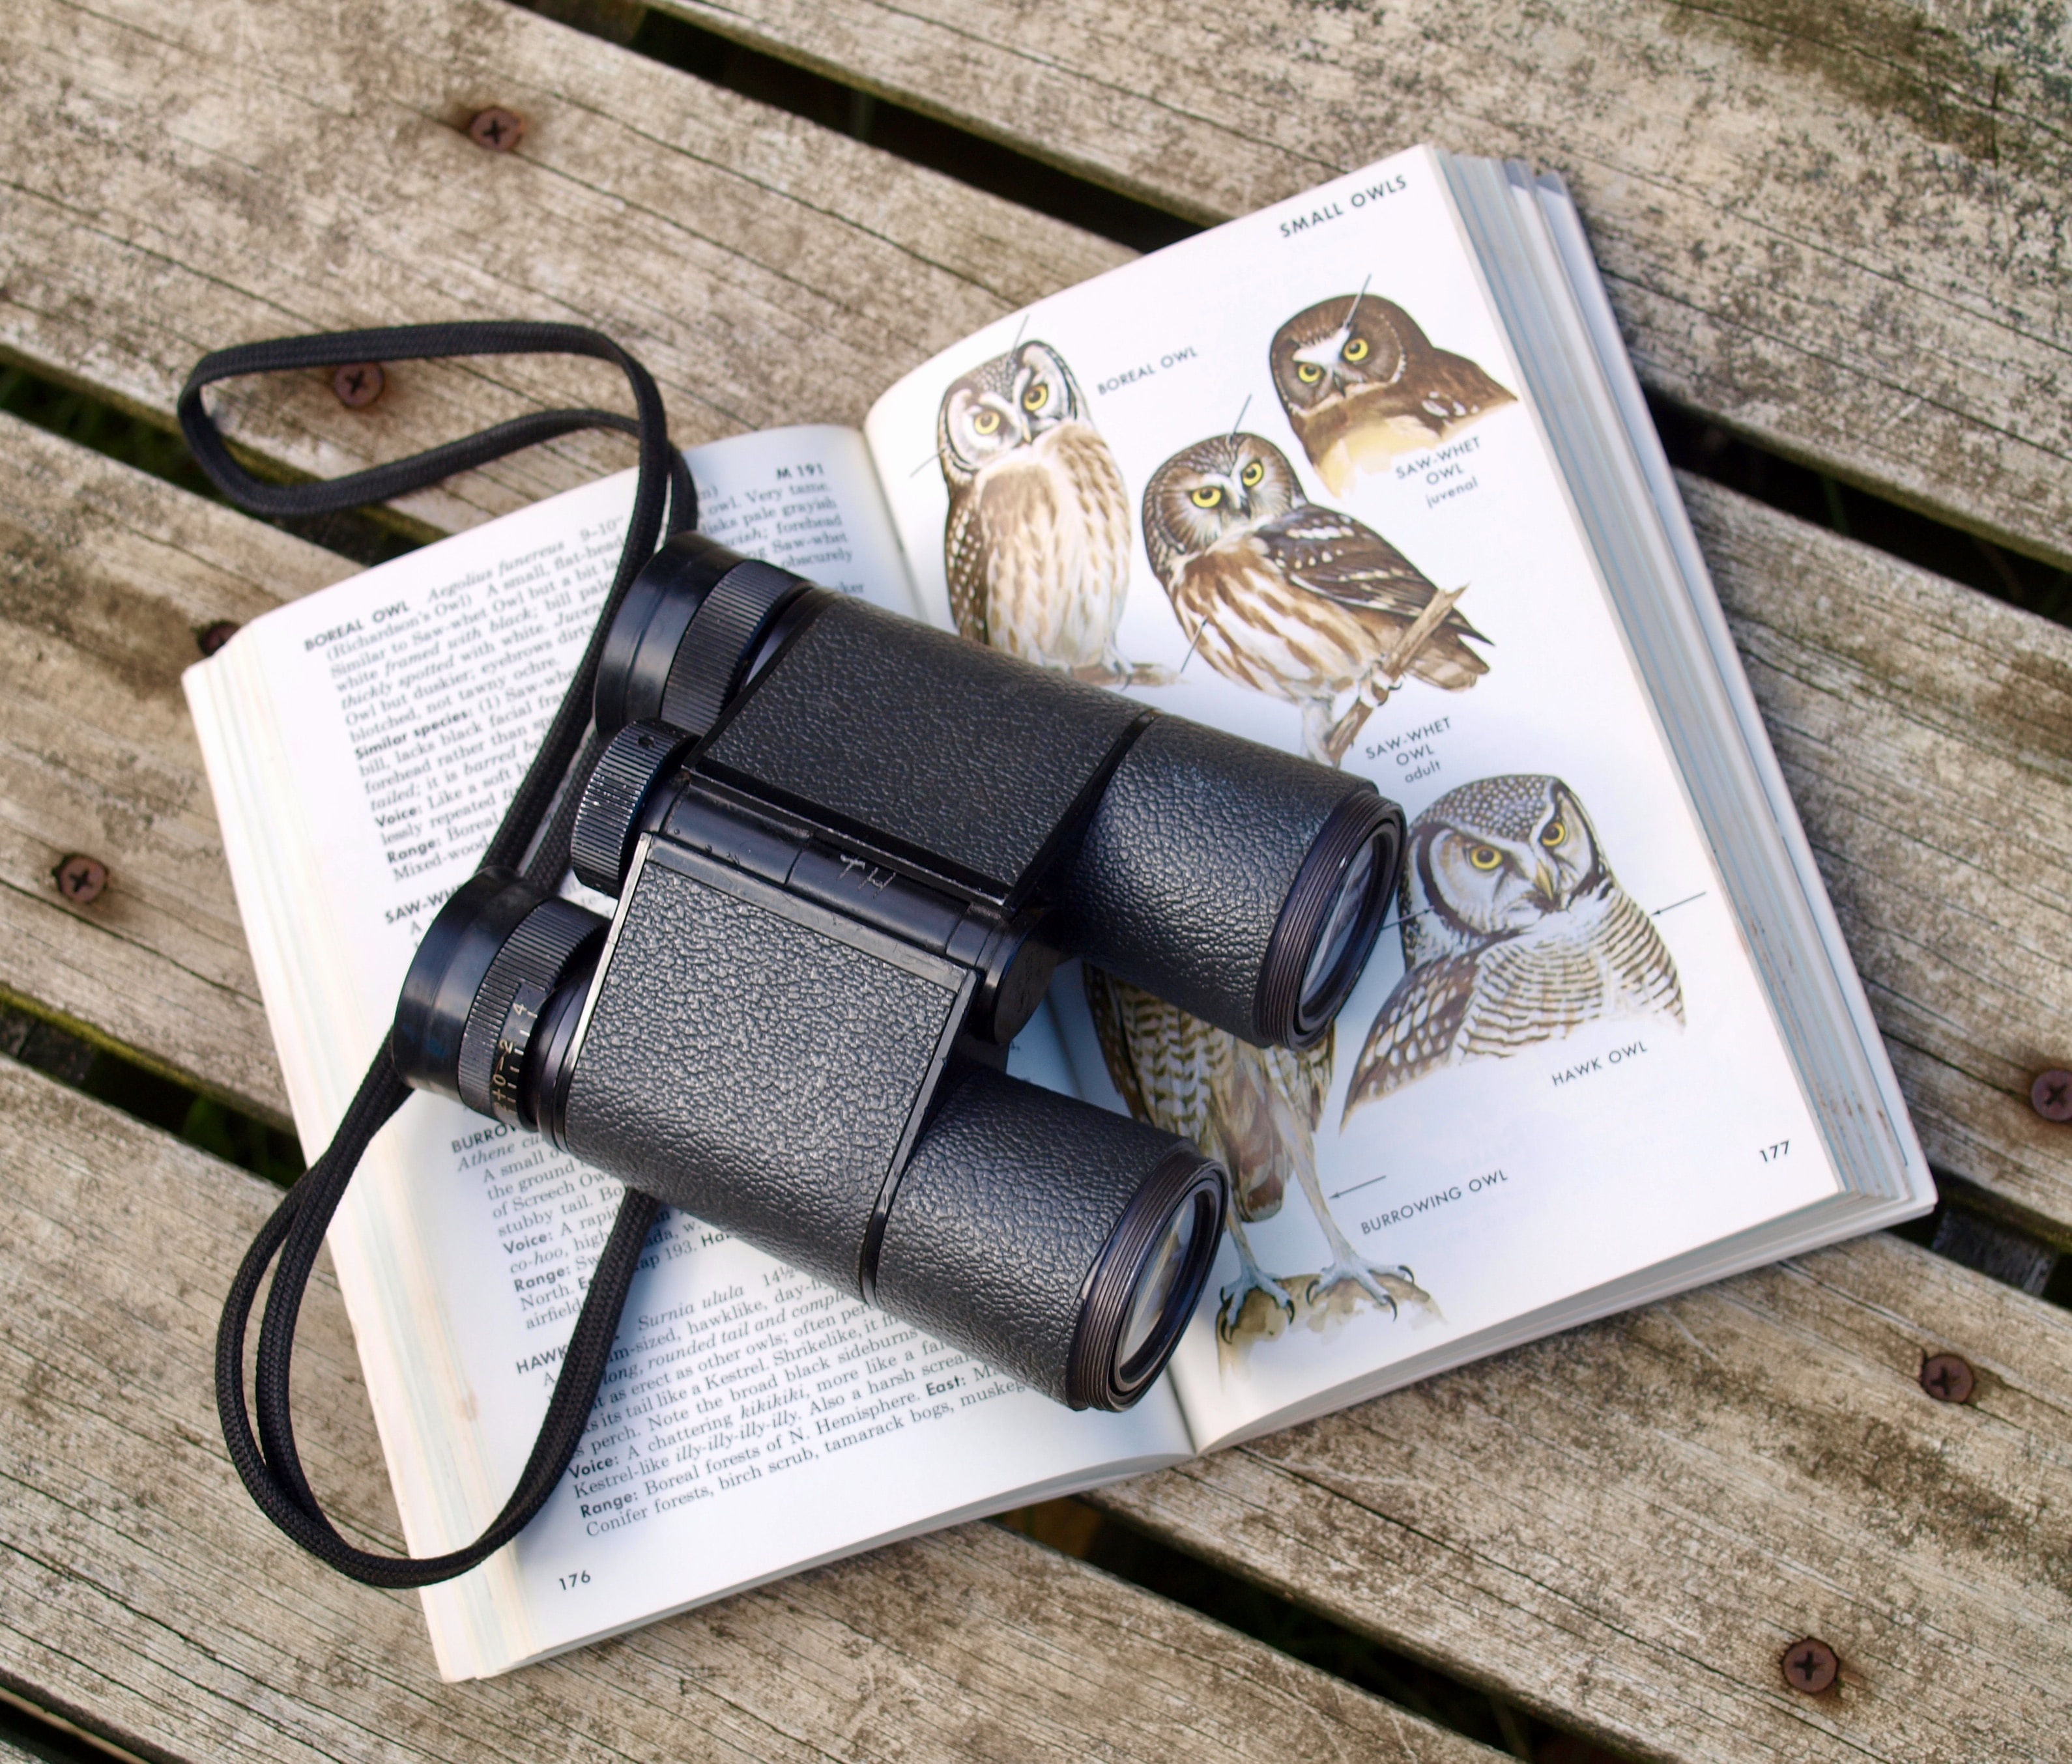 overhead view of binoculars on top of an open birdwatchers identification book identifying owls. Book and binoculars set on what appears to be a wooden picnic table